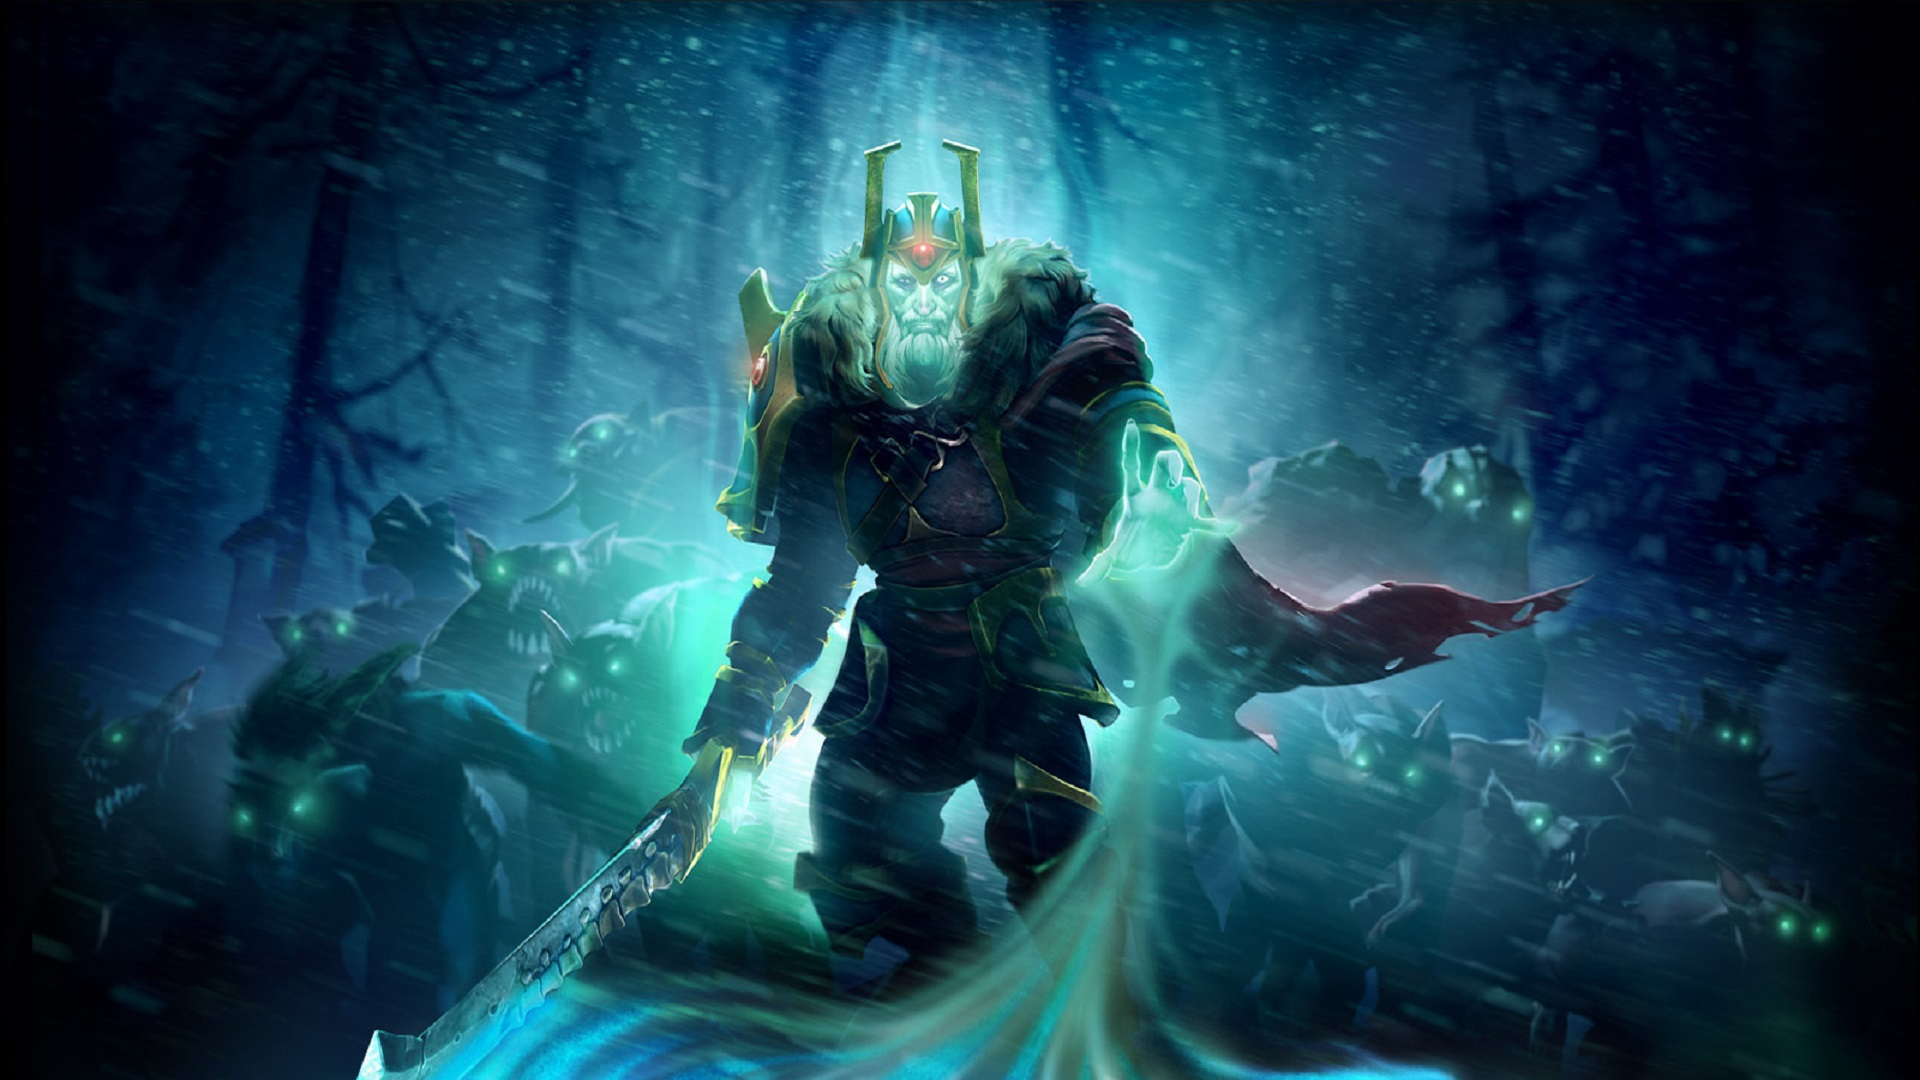 dota 2 wallpaper for iphone,action adventure game,cg artwork,pc game,fictional character,adventure game